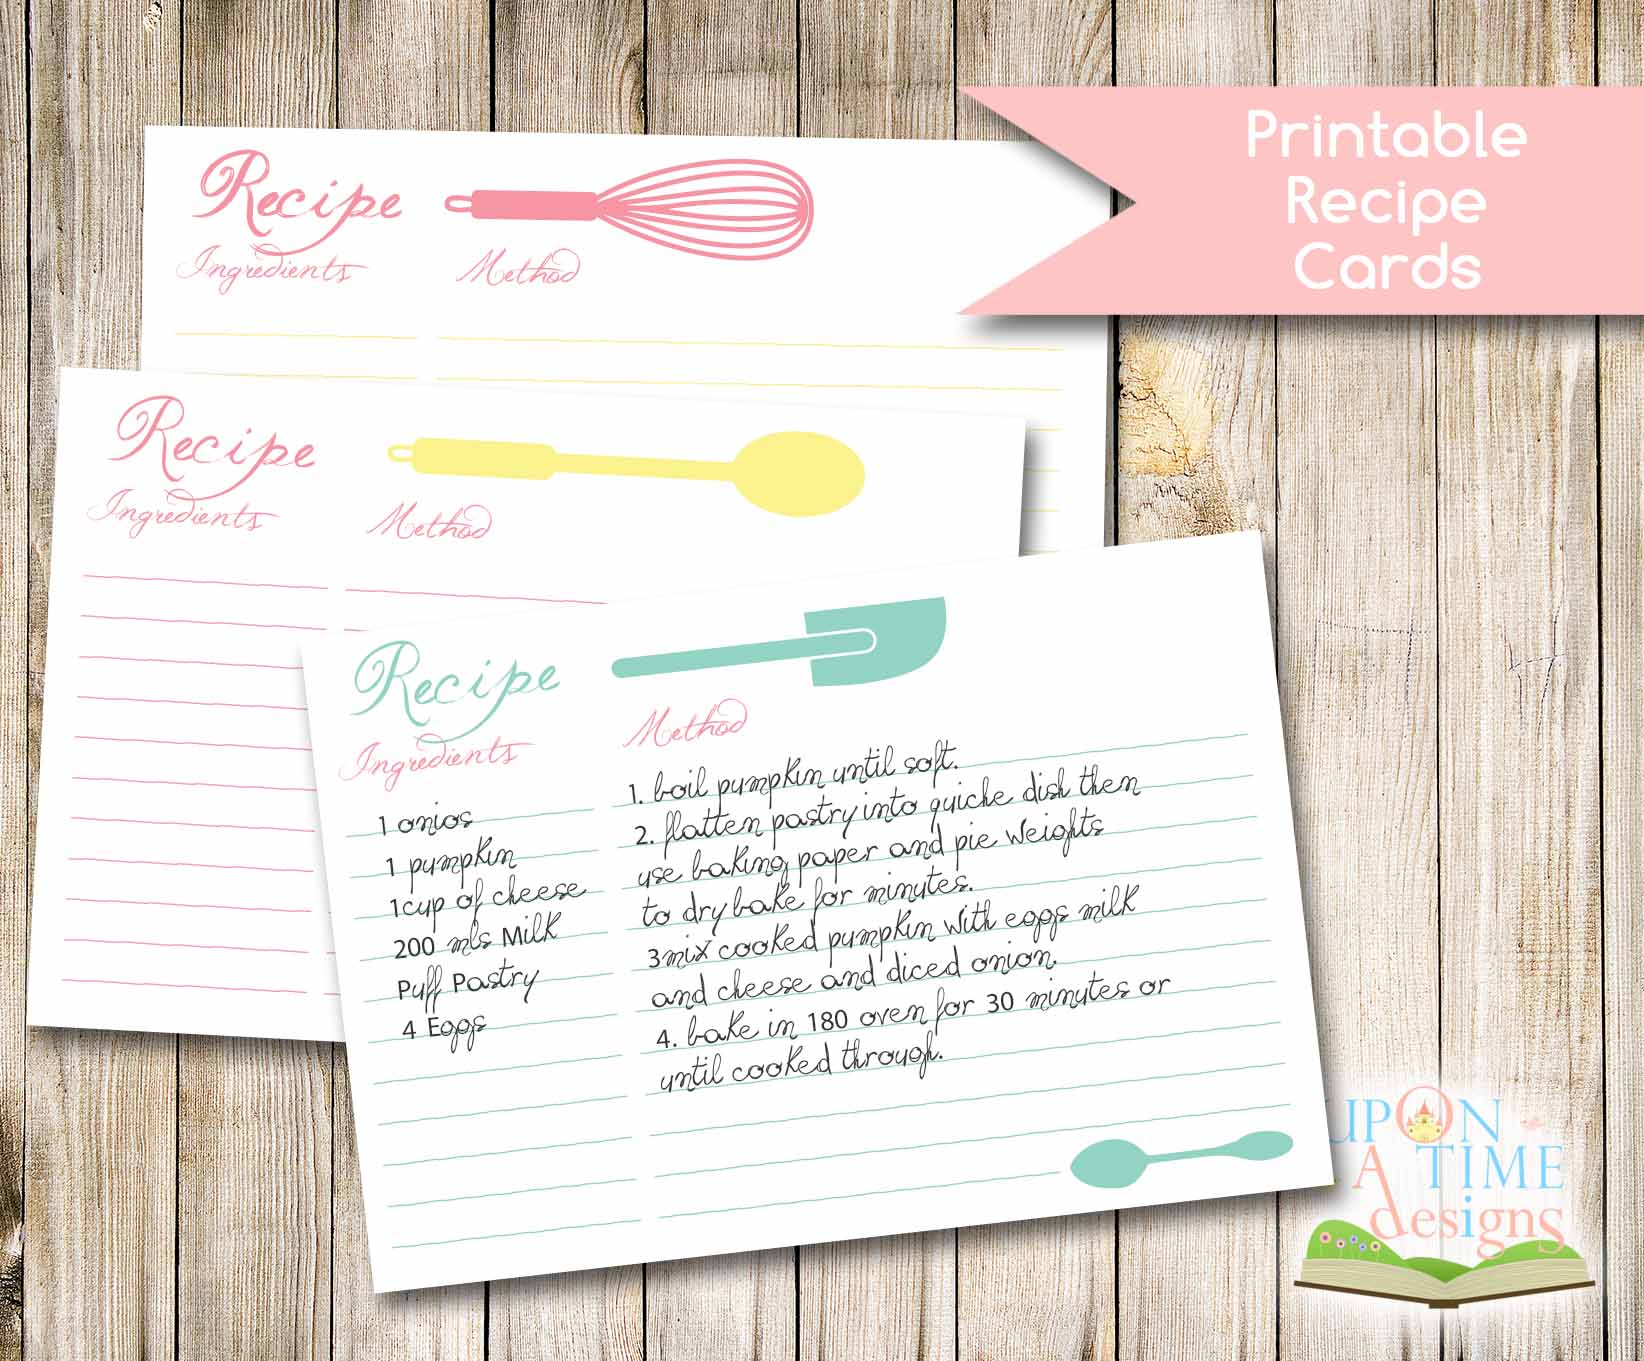 8 Best Images of Free Printable Recipe Cards To Type On - You Can Type